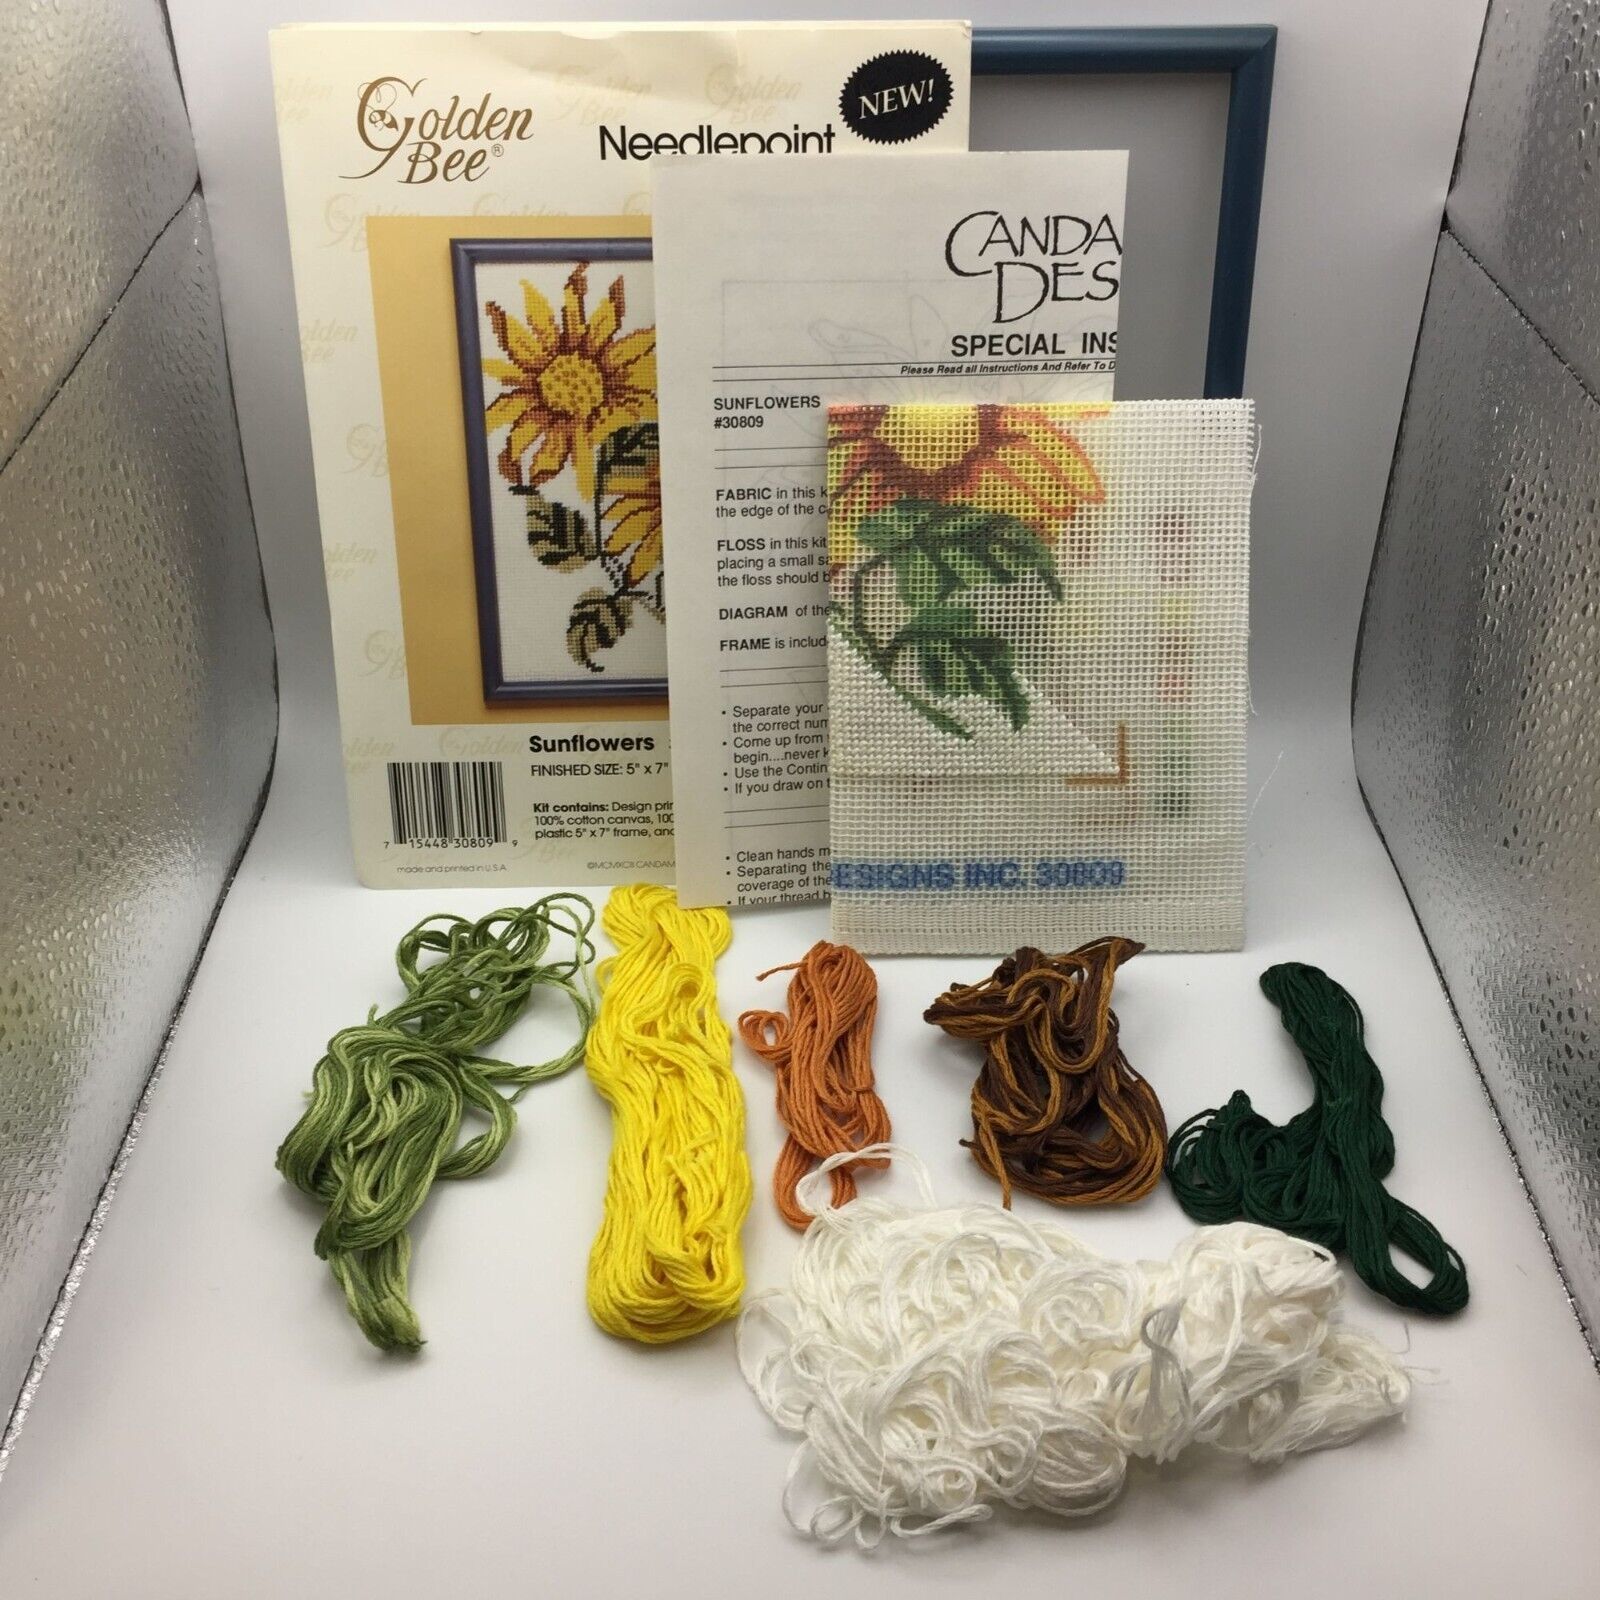 Golden Bee Needlepoint Sunflowers 30809 5" X 7" Craft Sewing Frame Included - $9.99